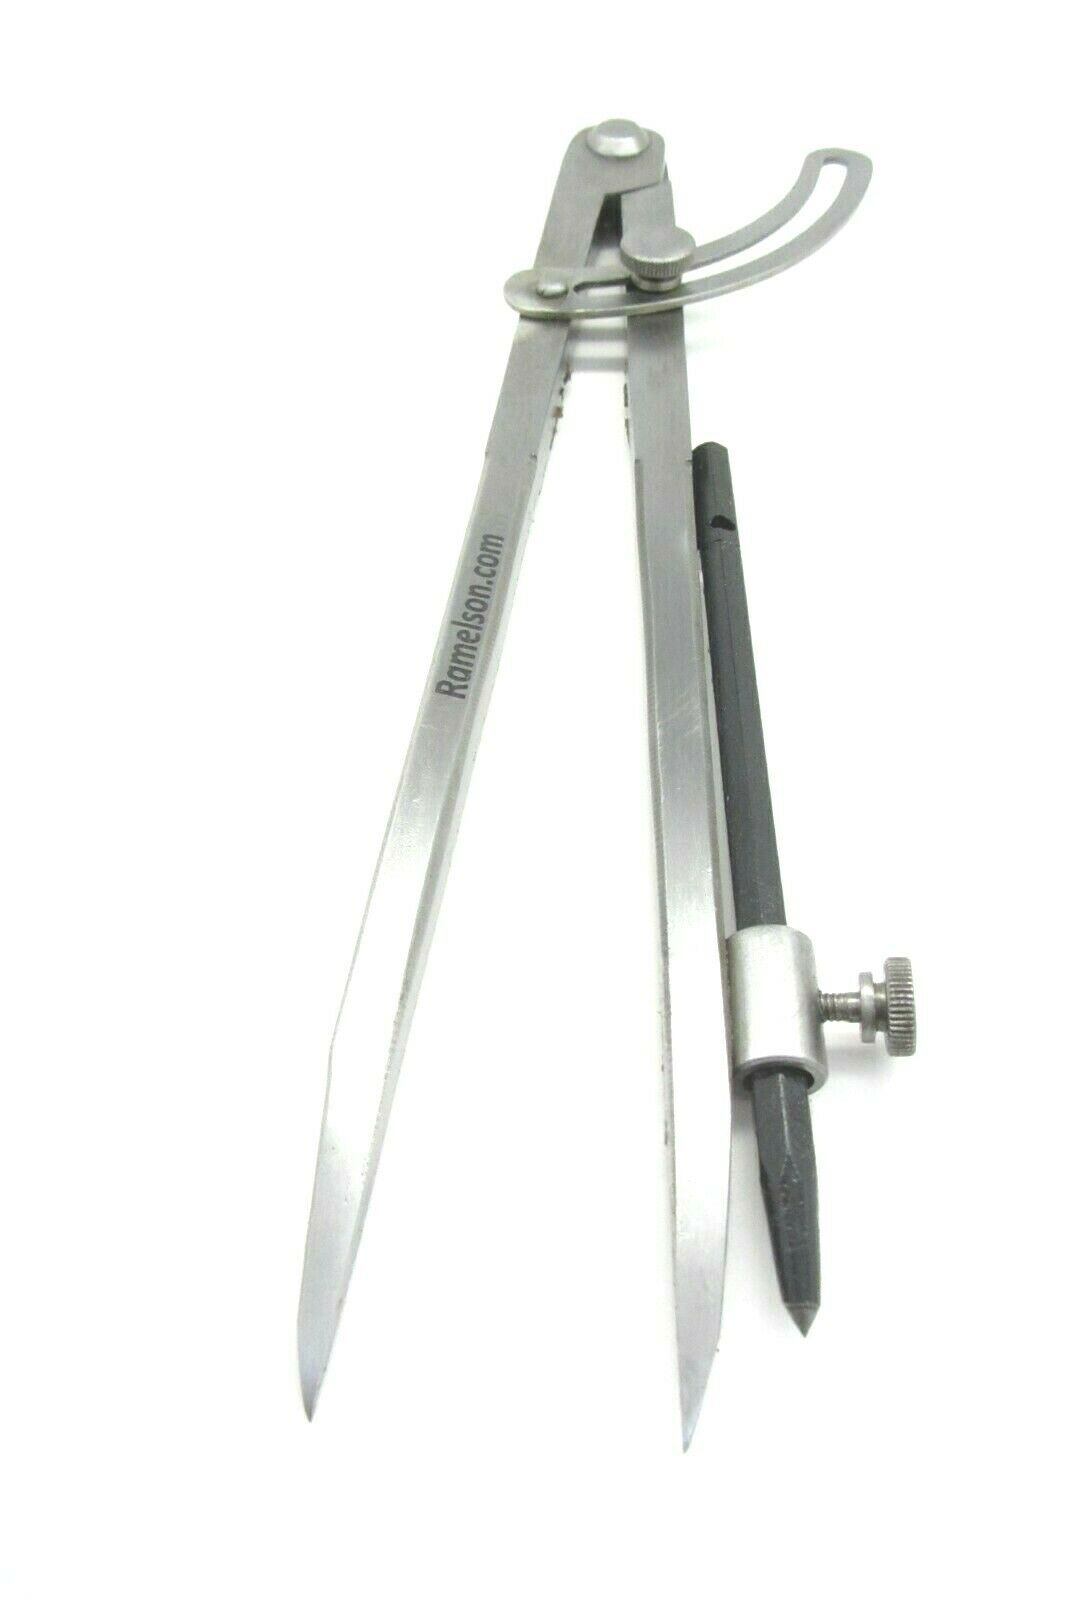 Drafting Tools Winged Divider Compass Caliper Adjustable Mechanical Drawing  Stainless Steel Engineering Instrument 